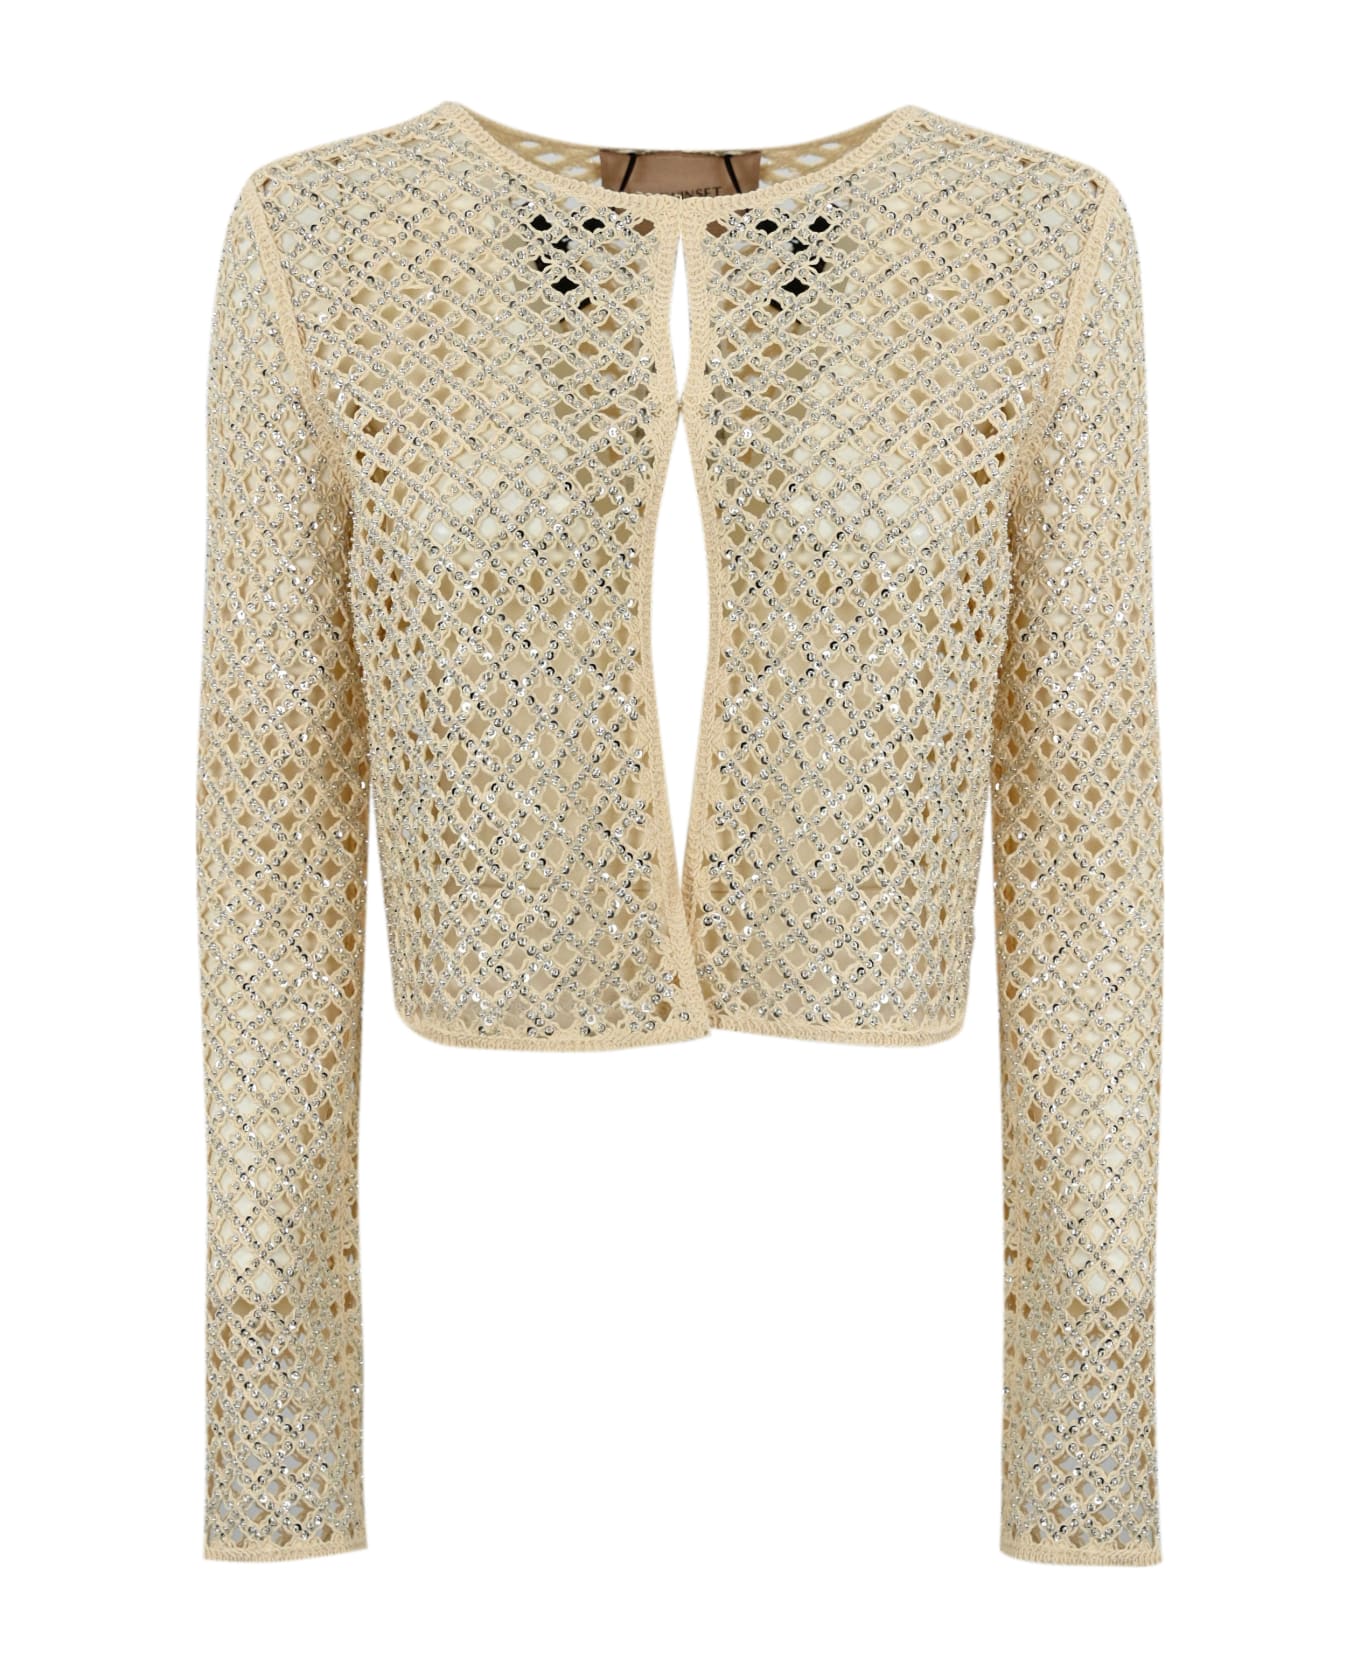 TwinSet Mesh Cardigan With Beads And Rhinestones - Beige